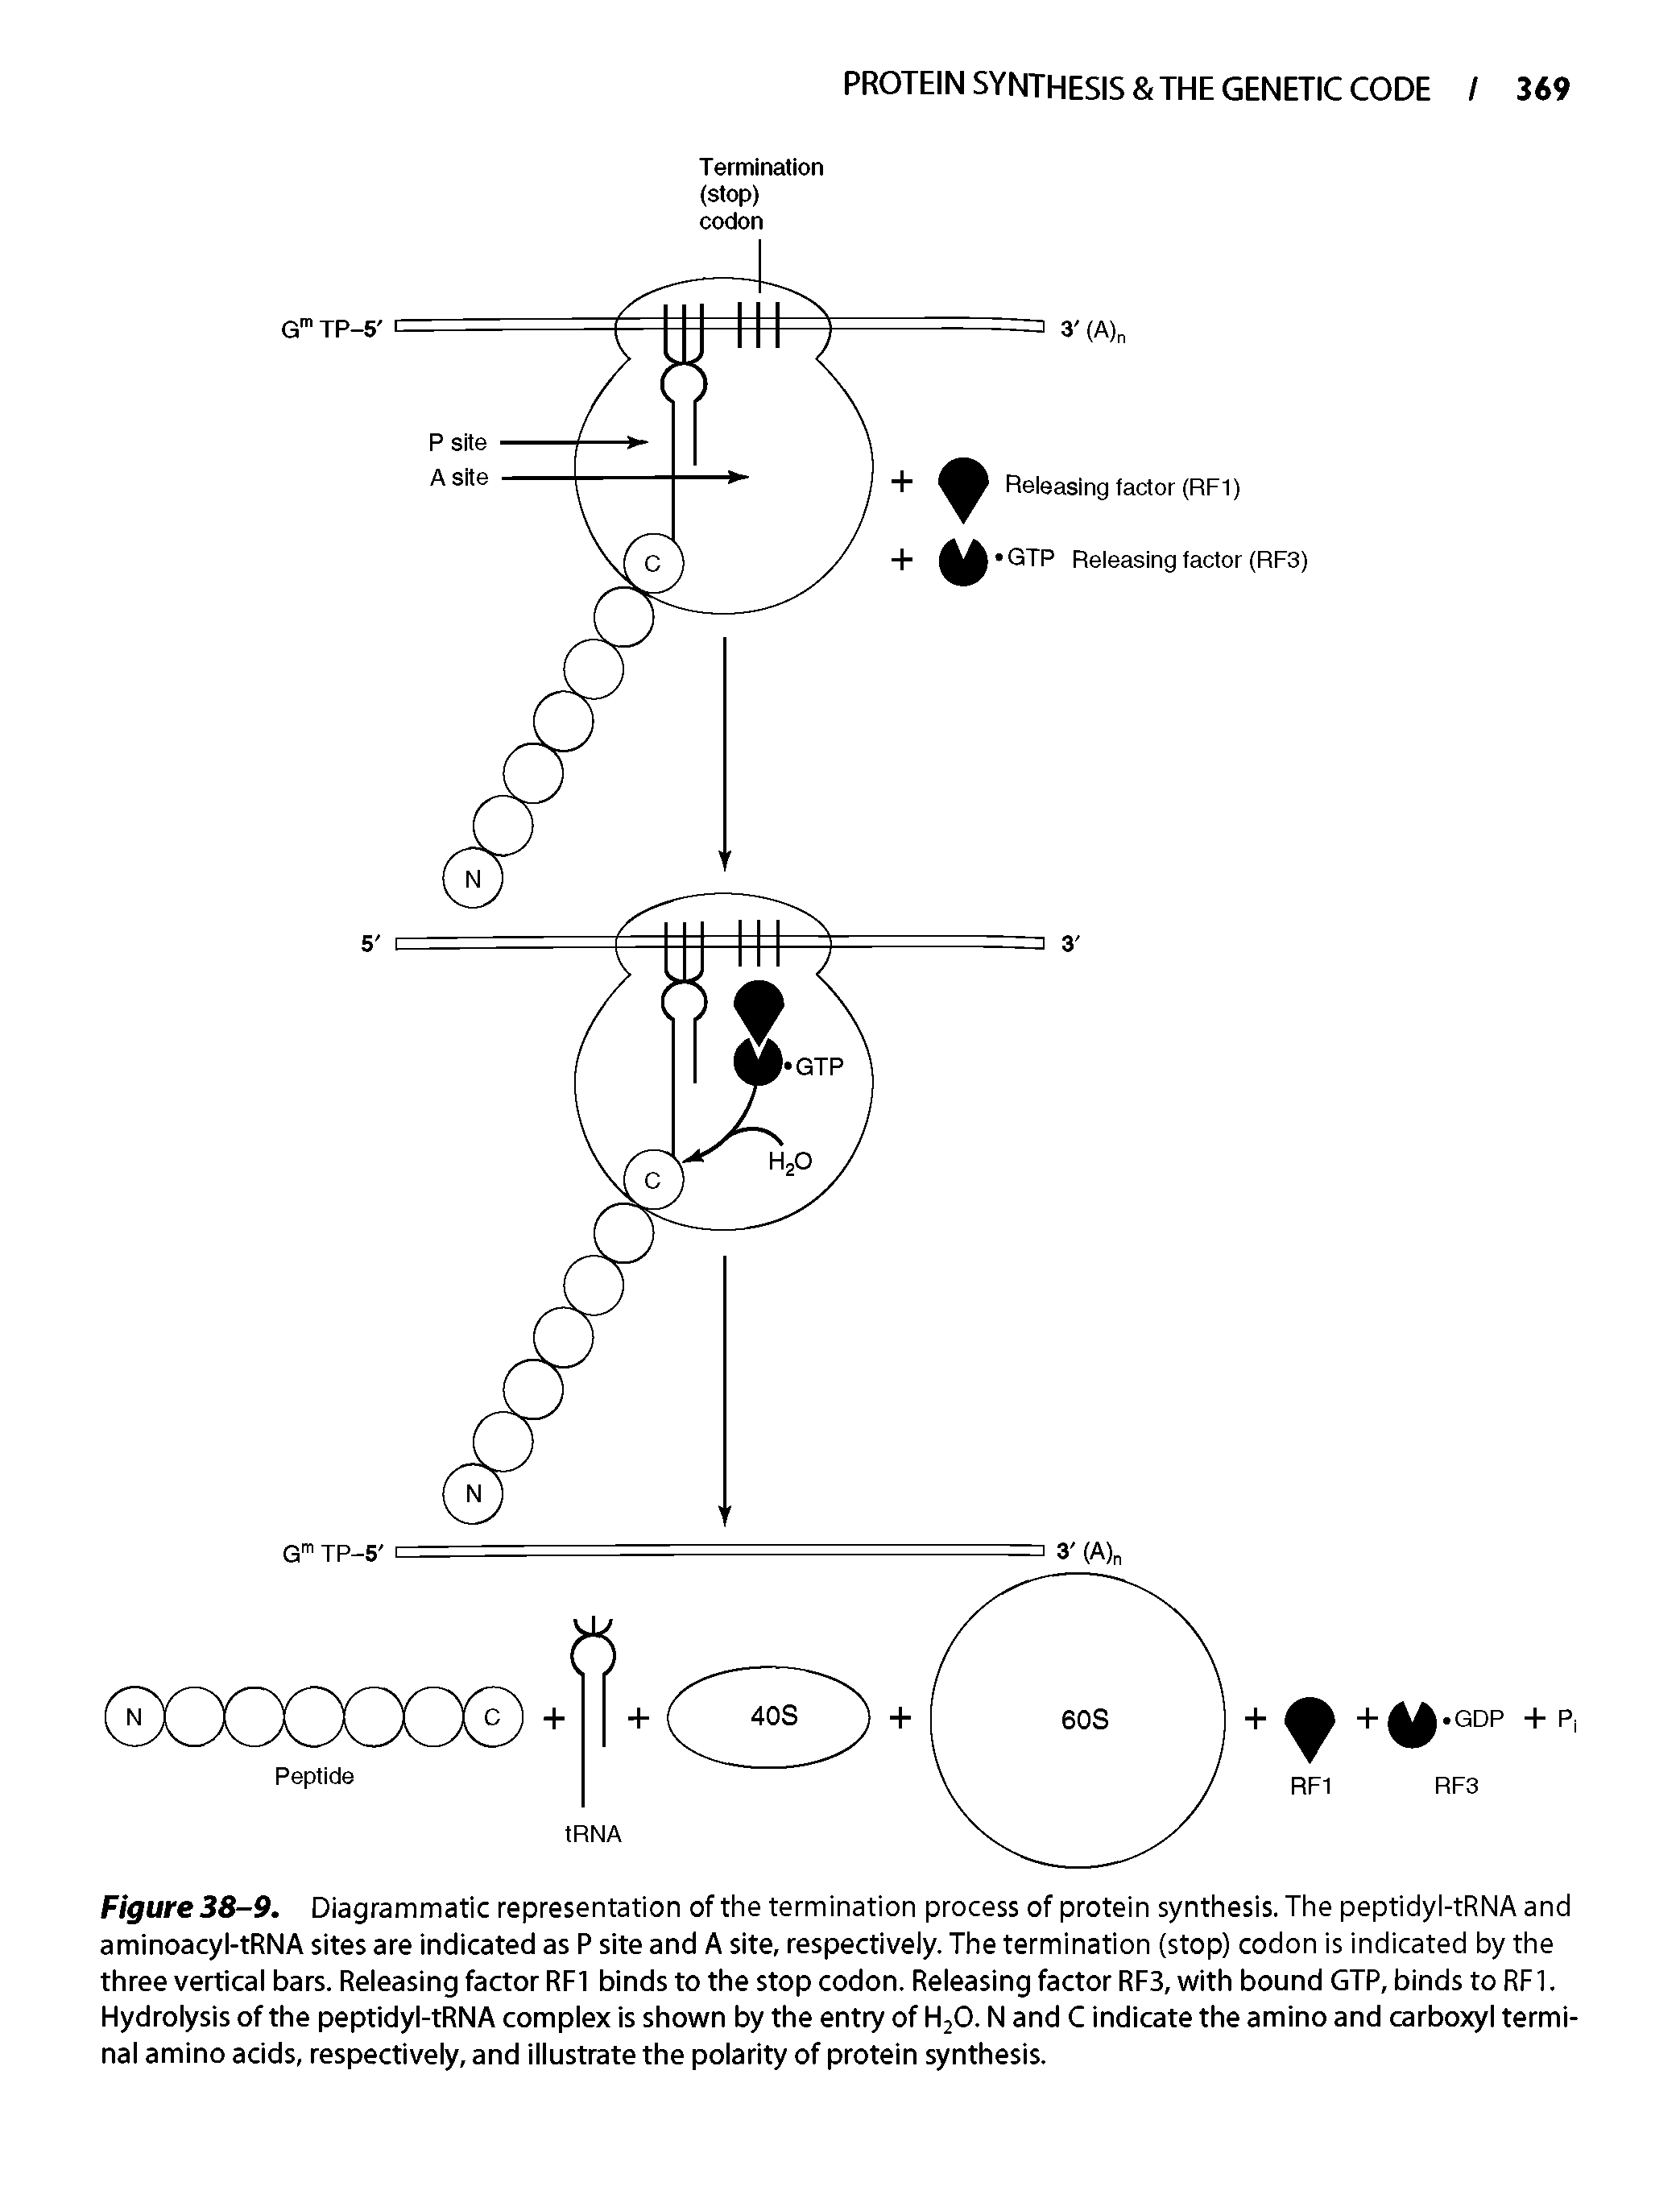 Figure 38-9. Diagrammatic representation of the termination process of protein synthesis. The peptidyl-tRNAand aminoacyl-tRNA sites are indicated as P site and A site, respectively. The termination (stop) codon is indicated by the three vertical bars. Releasing factor RF1 binds to the stop codon. Releasing factor RF3, with bound GTP, binds to RFl. Flydrolysisofthe peptidyl-tRNA complex is shown by the entry of HjO. N and C indicate the amino and carboxyl terminal amino acids, respectively, and illustrate the polarity of protein synthesis.